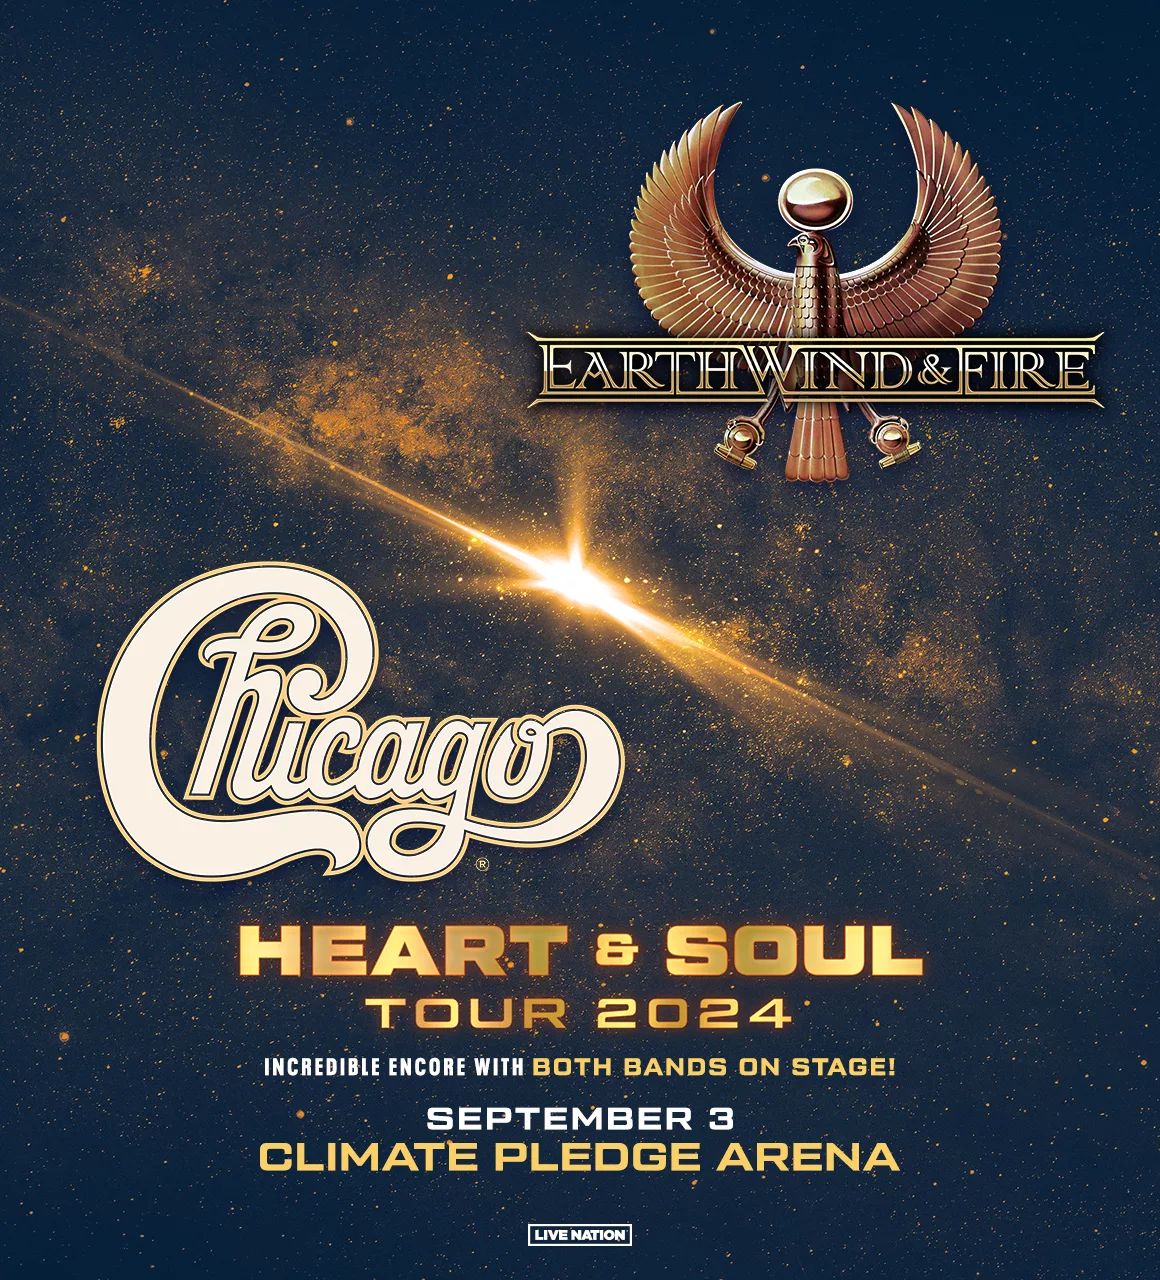 Chicago with Earth Wind and Fire